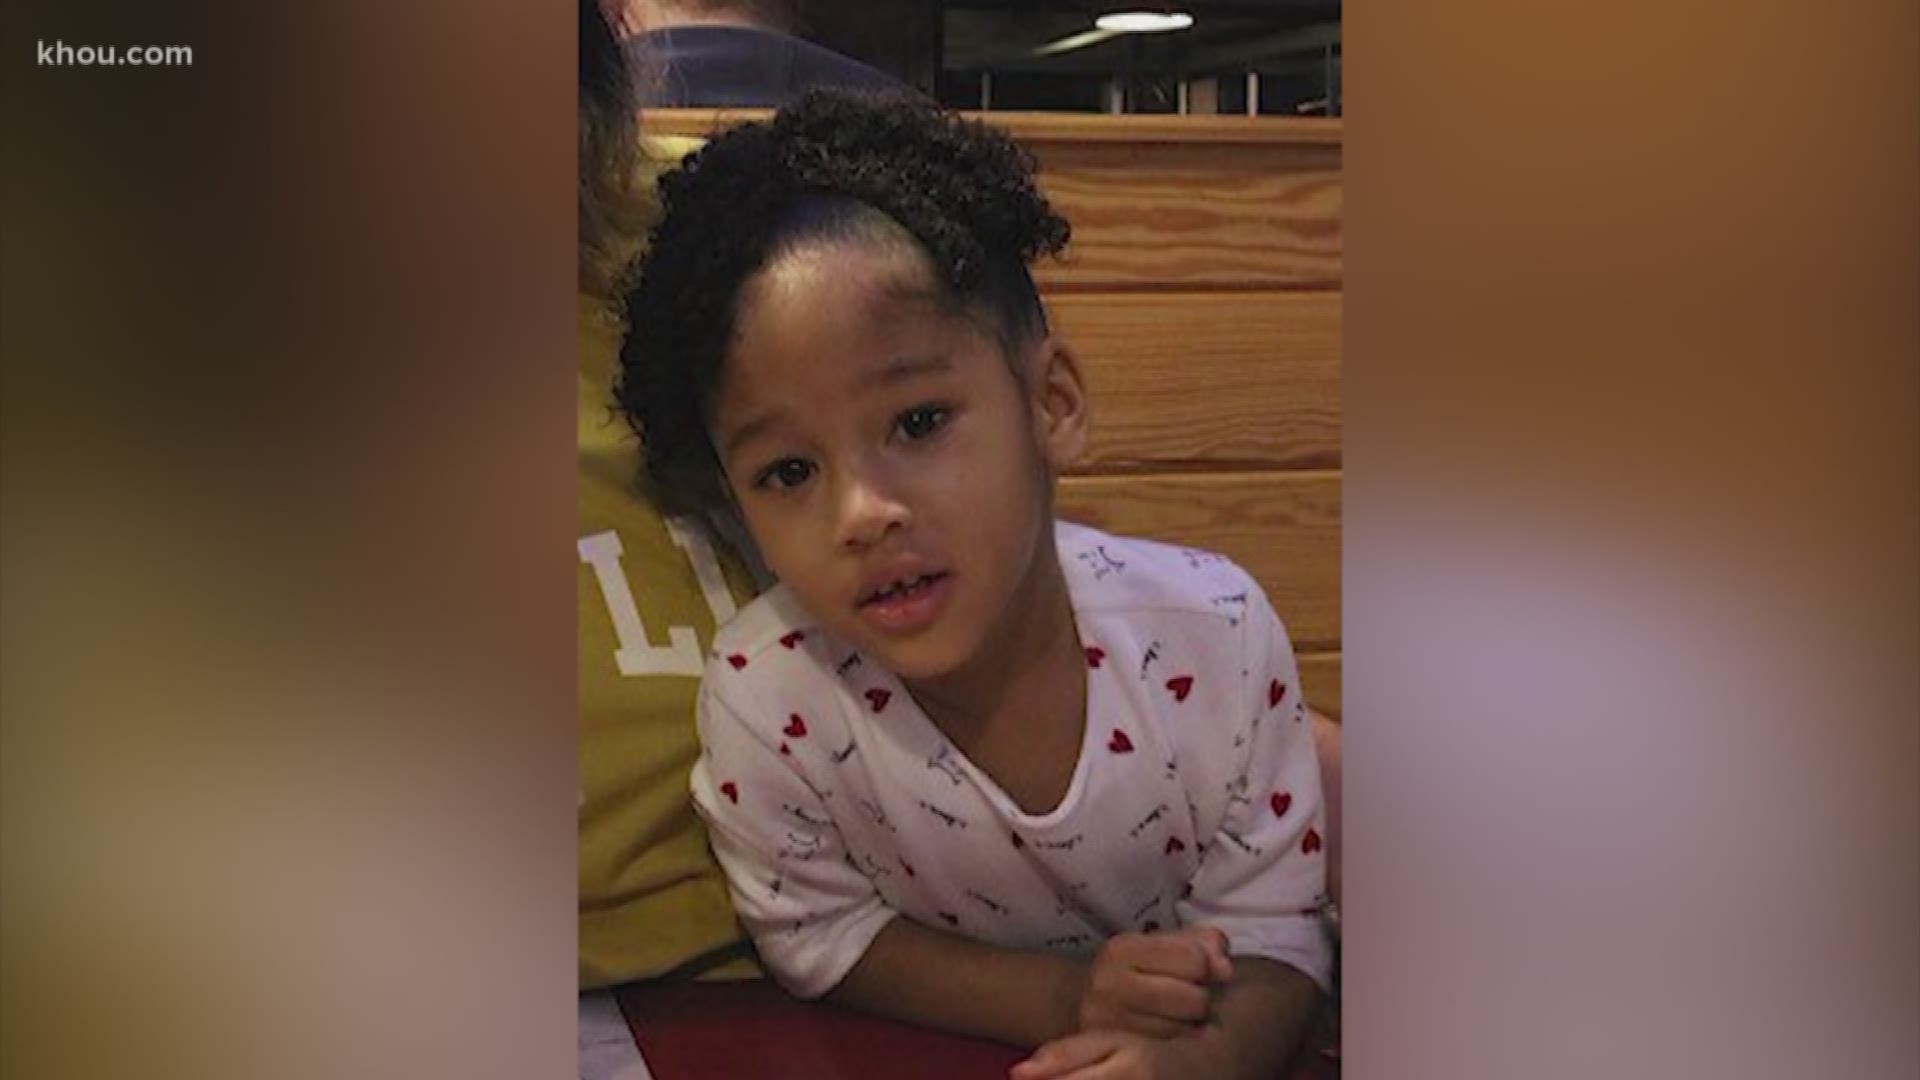 It's been nearly one month since 4-year-old Maleah Davis went missing. We still don't know where she is. A northwest Houston community is turning to prayer to help bring the girl home.